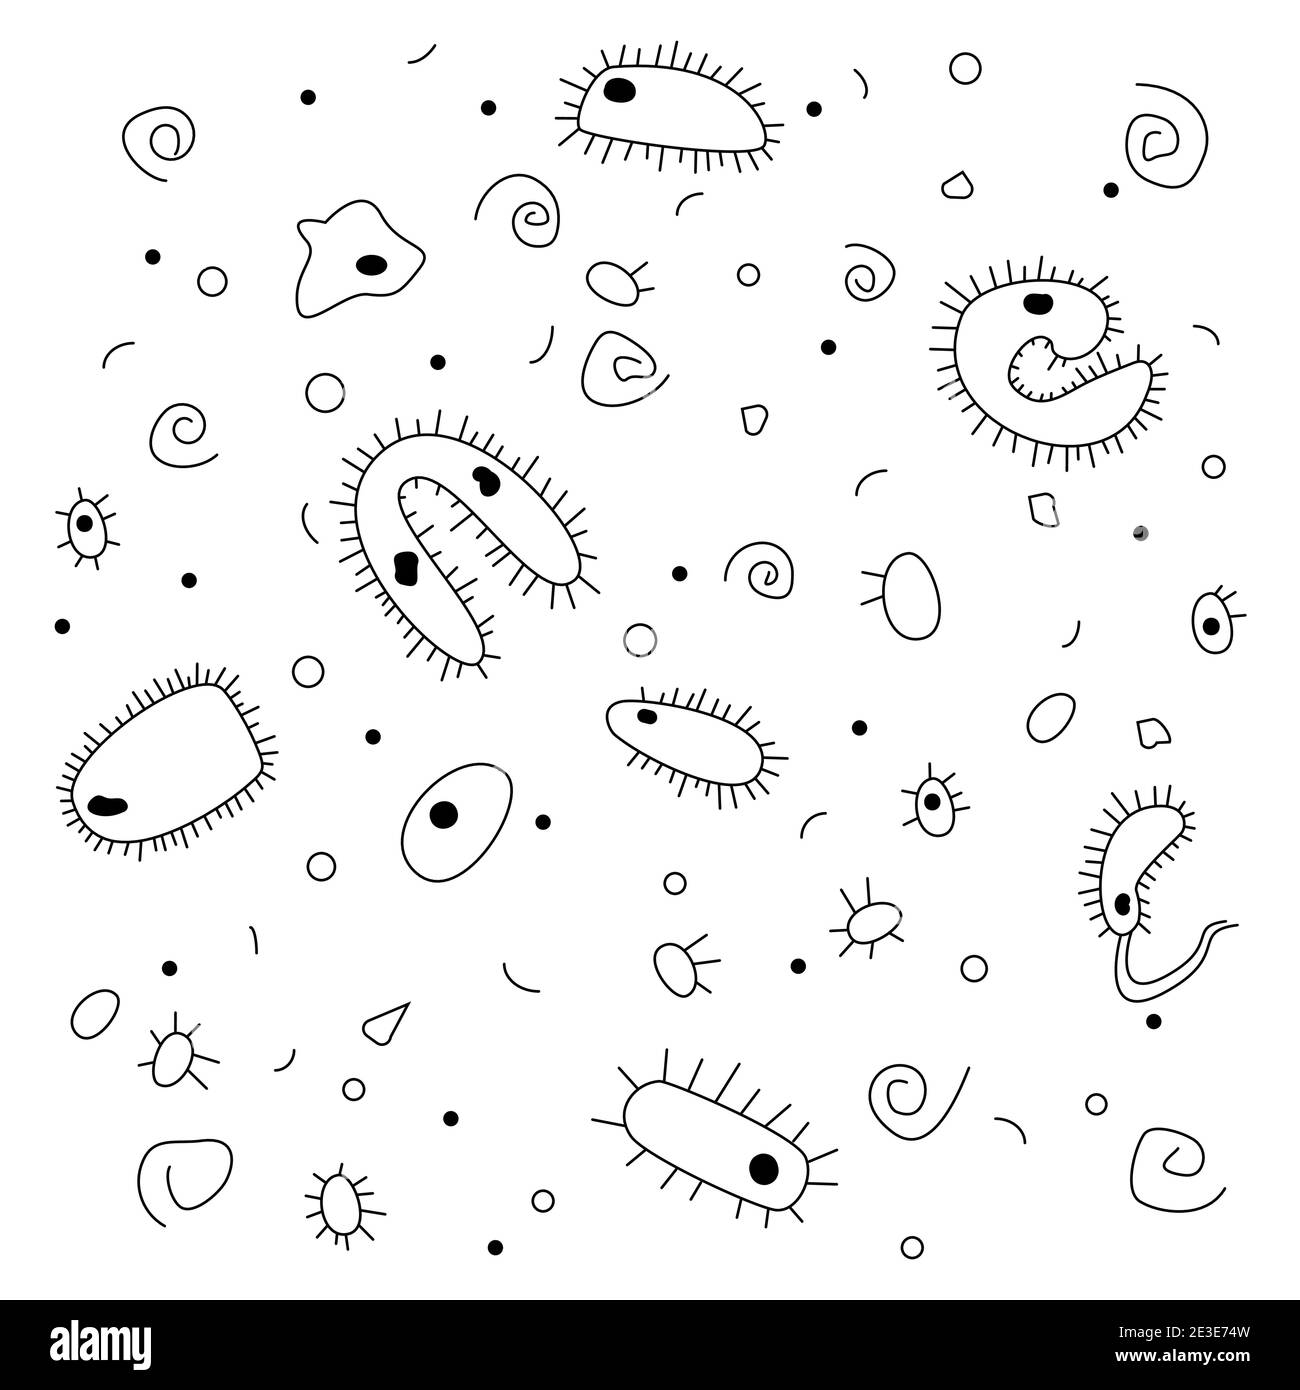 Doodle style, handdrawn drawing. Black and white bacteria on a white background. View under the microscope. Stock Vector